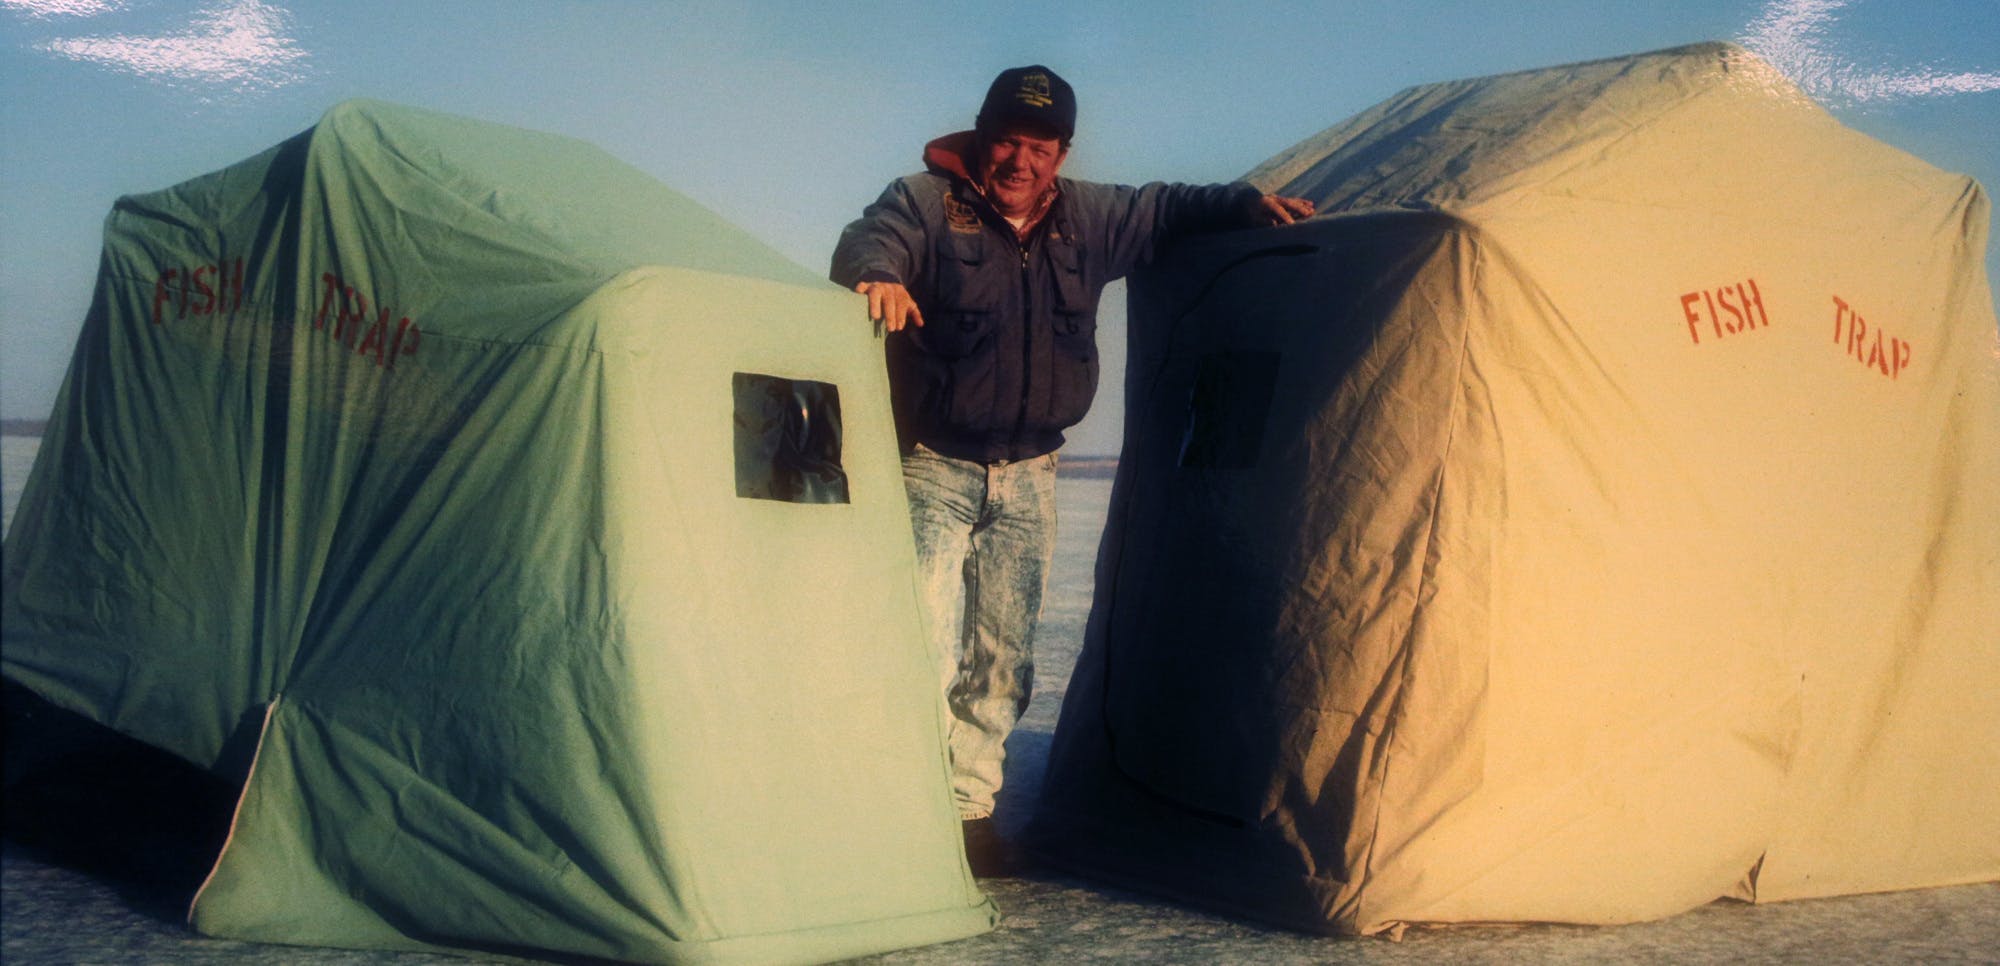 Clam Outdoors: From garage business to ice fishing leader